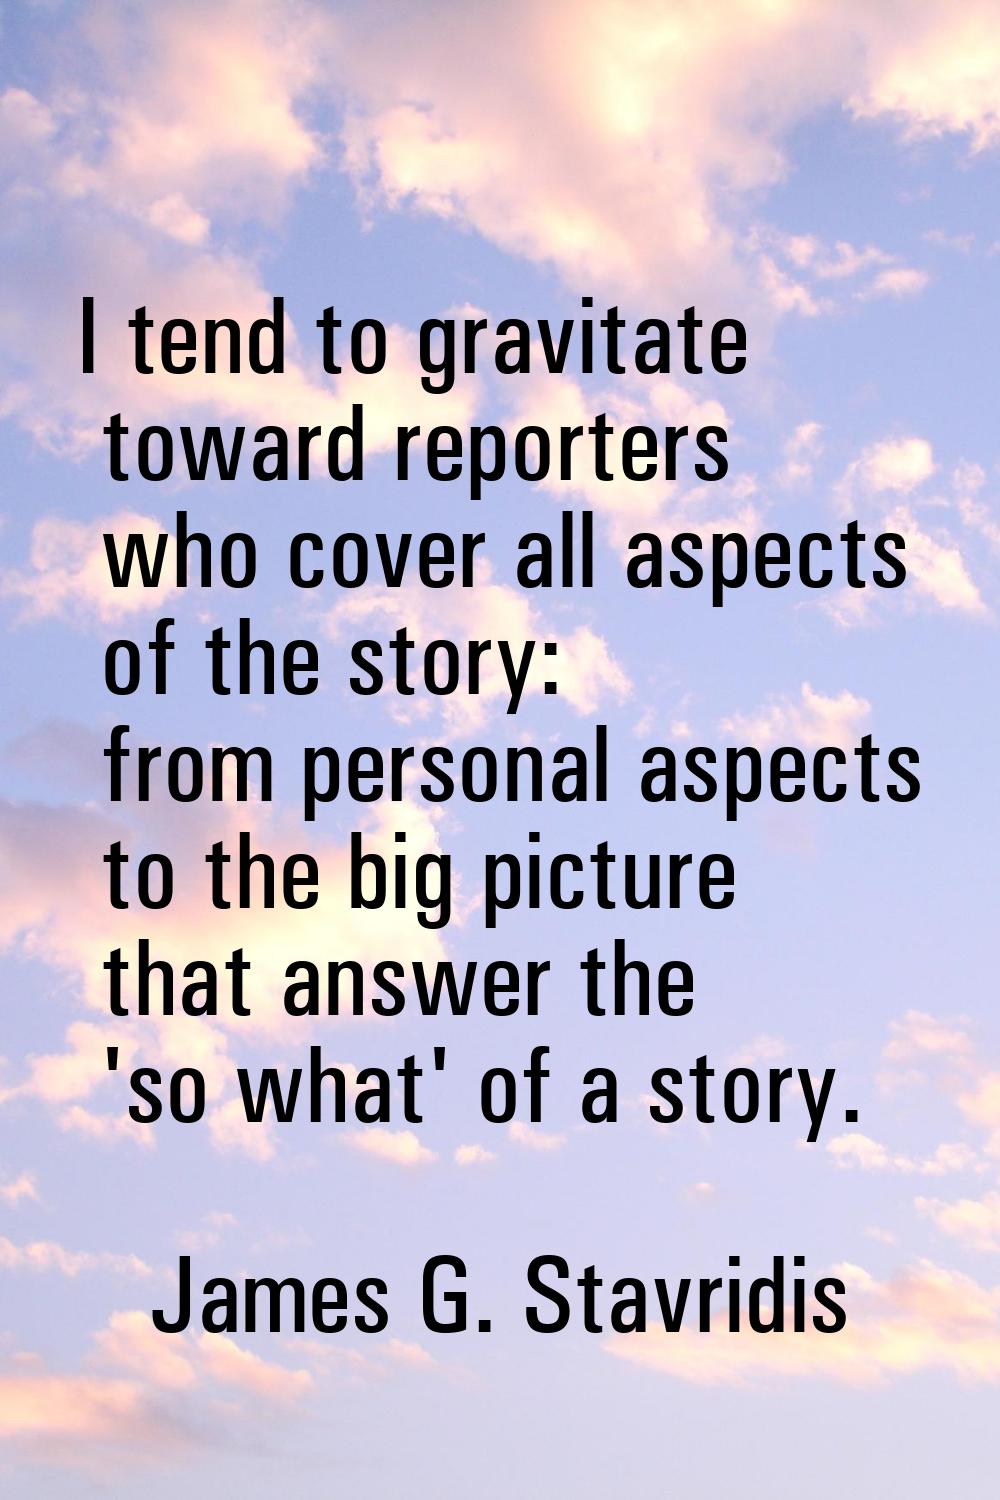 I tend to gravitate toward reporters who cover all aspects of the story: from personal aspects to t